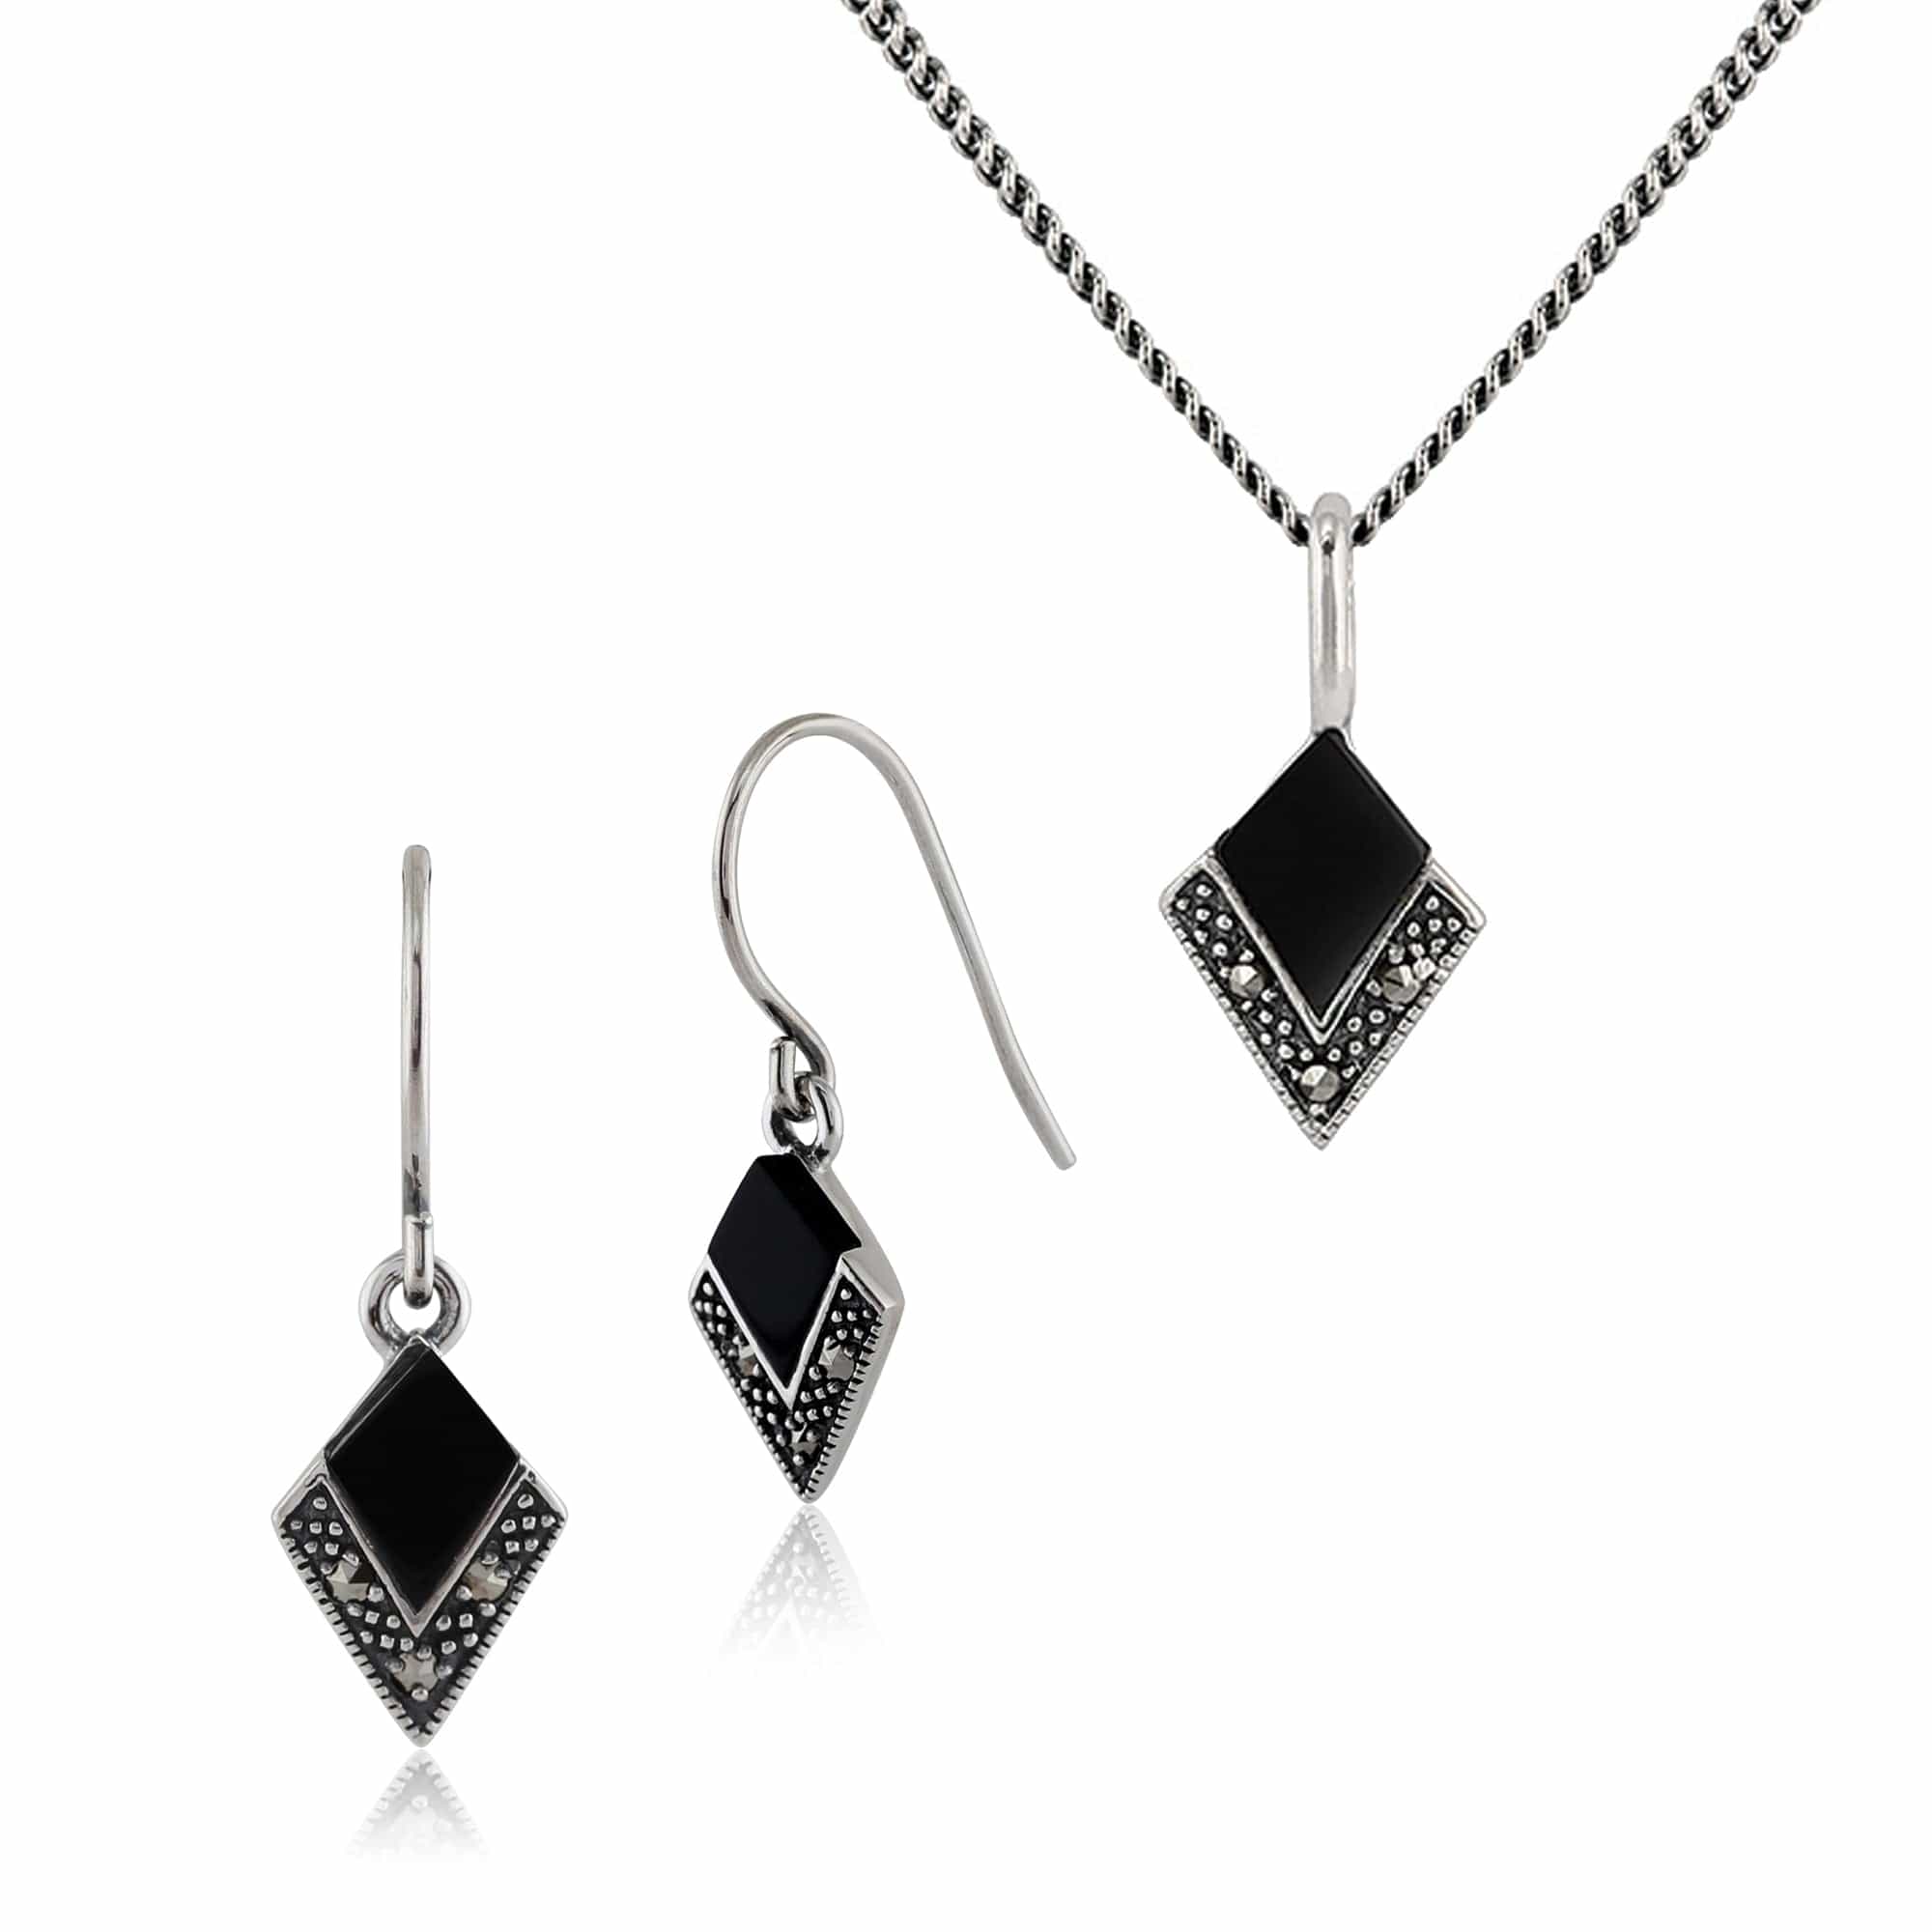 214E806901925-27078 Art Deco Style Style Black Onyx & Round Marcasite Kite Drop Earrings & Pendant Set in 925 Sterling Silver 1